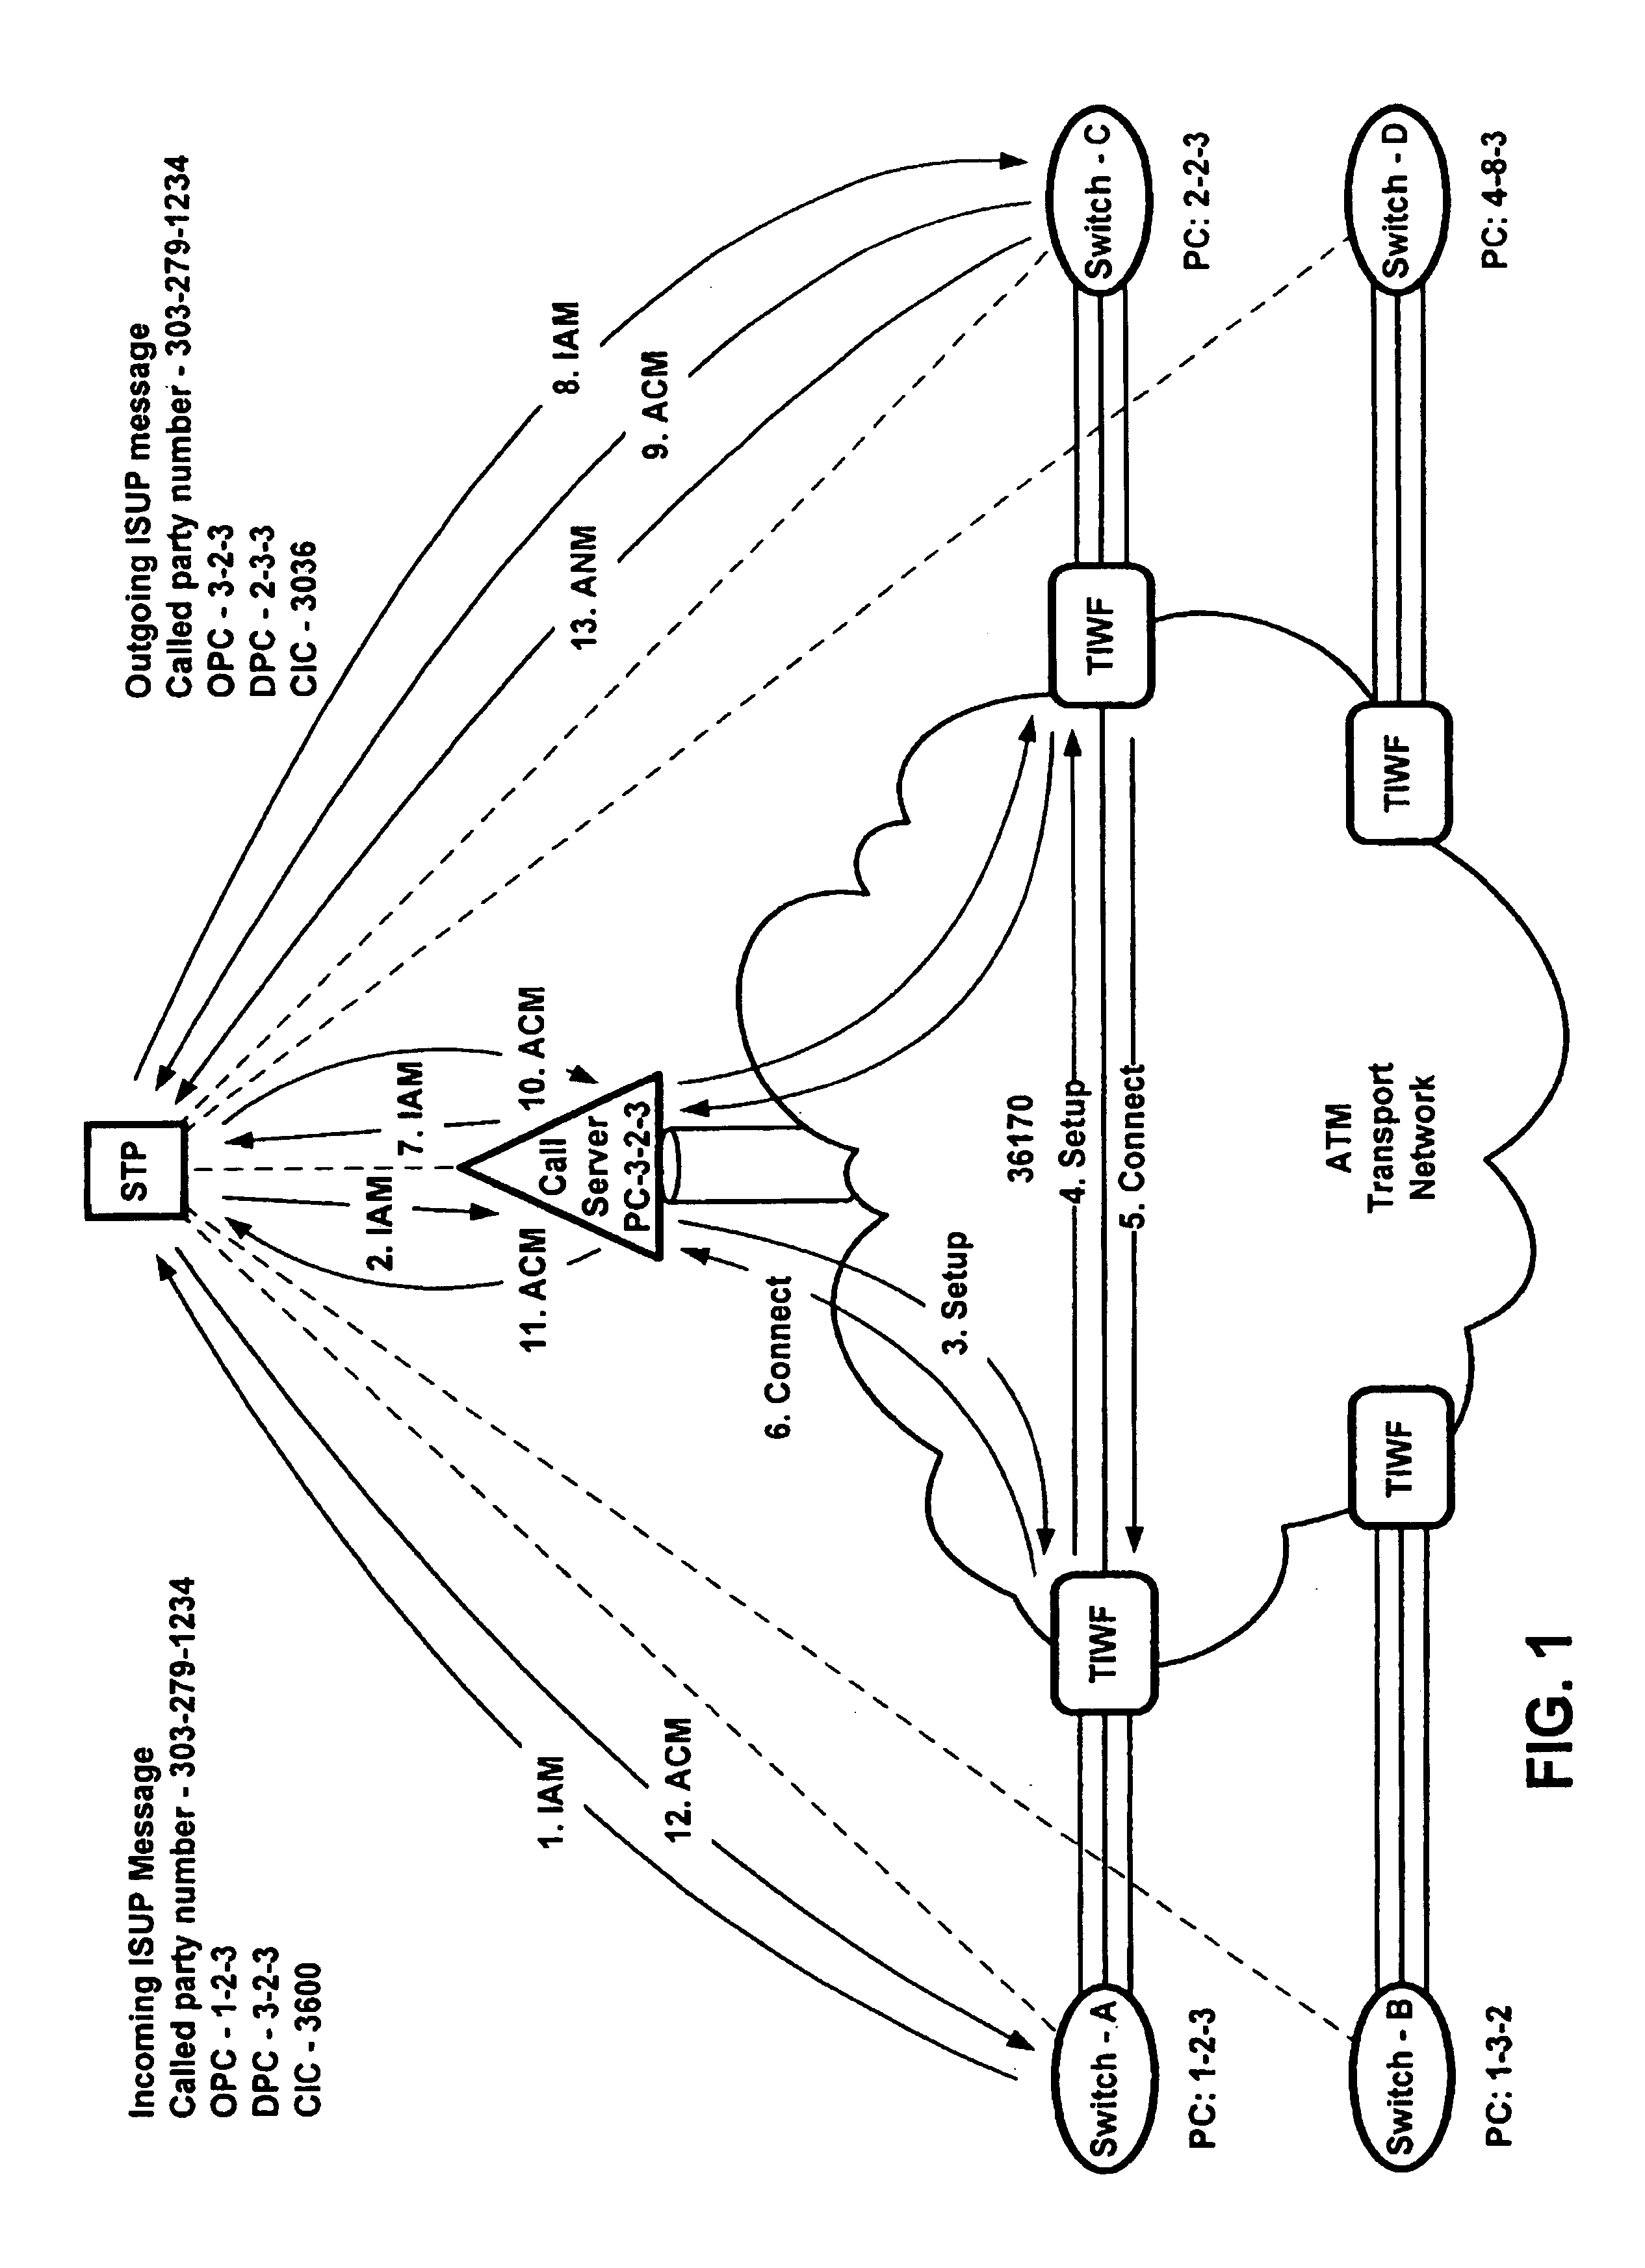 Automated mass calling control for public switched telephone networks employing a packet based virtual tandem